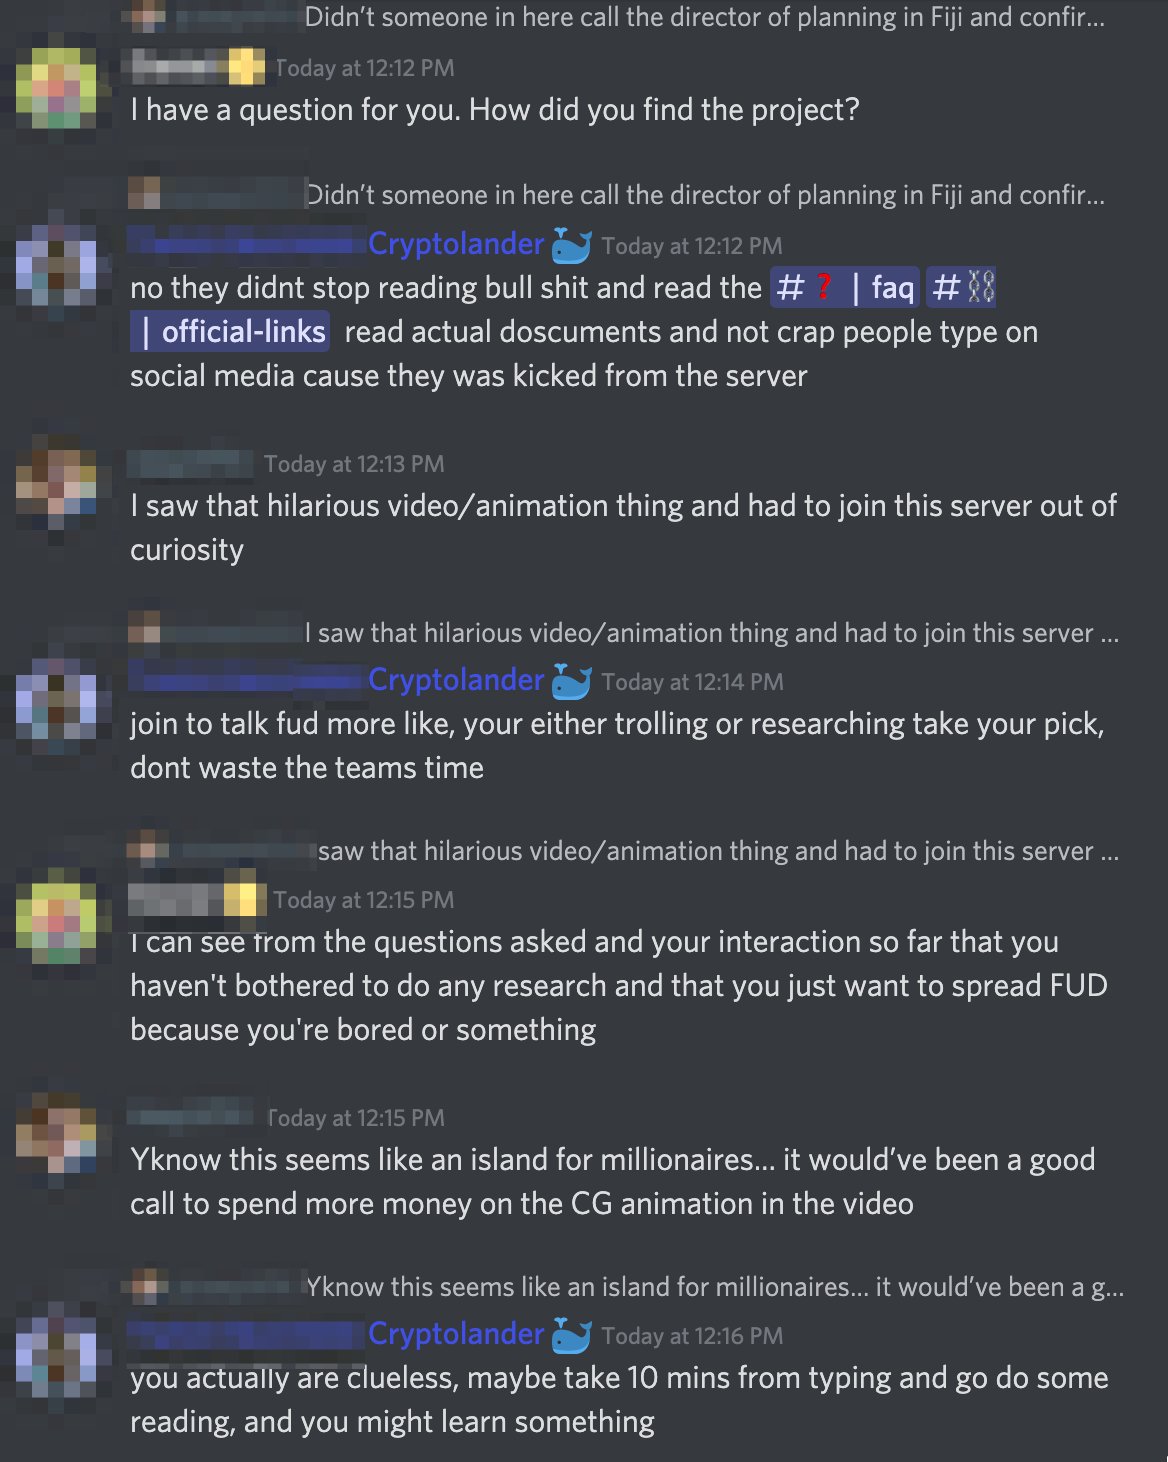 Discord:
Cryptolander 1: I have a question for you. How did you find the project?
Cryptolander 2: no they didnt stop reading bull shit and read the #faq #official-links  read actual doscuments and not crap people type on social media cause they was kicked from the server
Person 1: I saw that hilarious video/animation thing and had to join this server out of curiosity
Cryptolander 2: join to talk fud more like, your either trolling or researching take your pick, dont waste the teams time
Cryptolander 1: I can see from the questions asked and your interaction so far that you haven't bothered to do any research and that you just want to spread FUD because you're bored or something
Person 1: Yknow this seems like an island for millionaires… it would’ve been a good call to spend more money on the CG animation in the video
Cryptolander 2: you actually are clueless, maybe take 10 mins from typing and go do some reading, and you might learn something